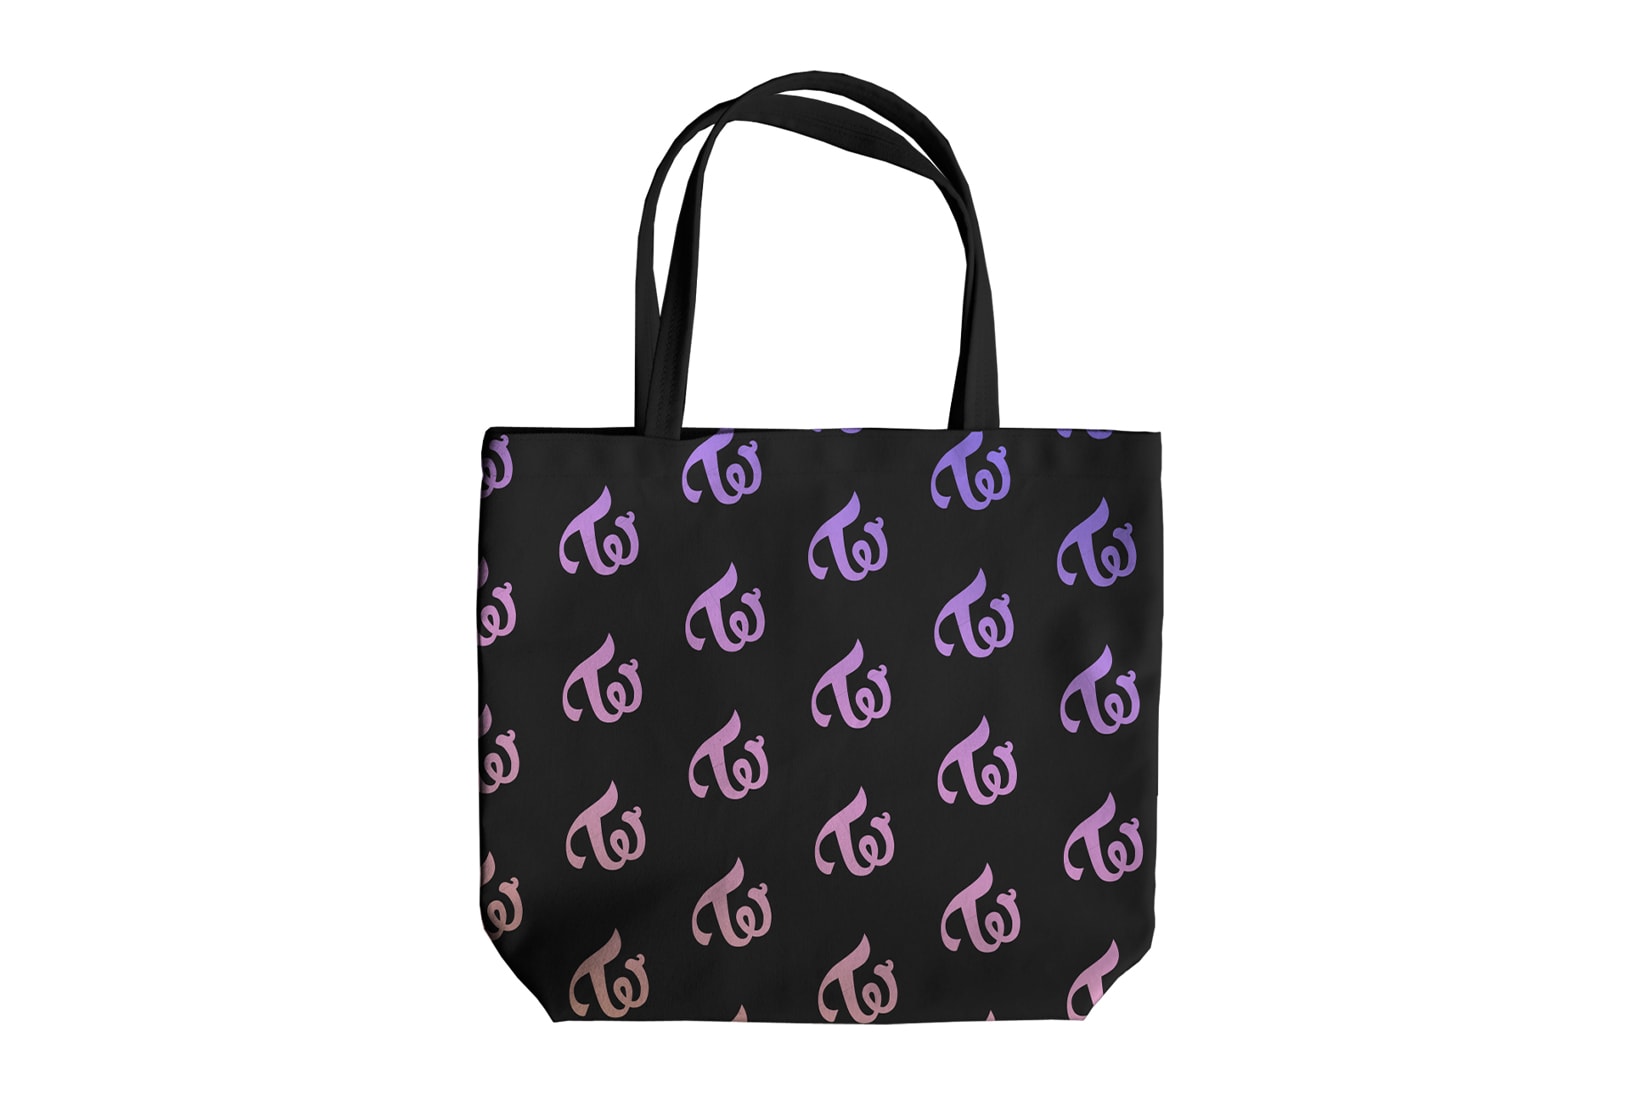 TWICE 4th World Tour Collection Merchandise Outerwear Accessories K-pop Tote Bag Black